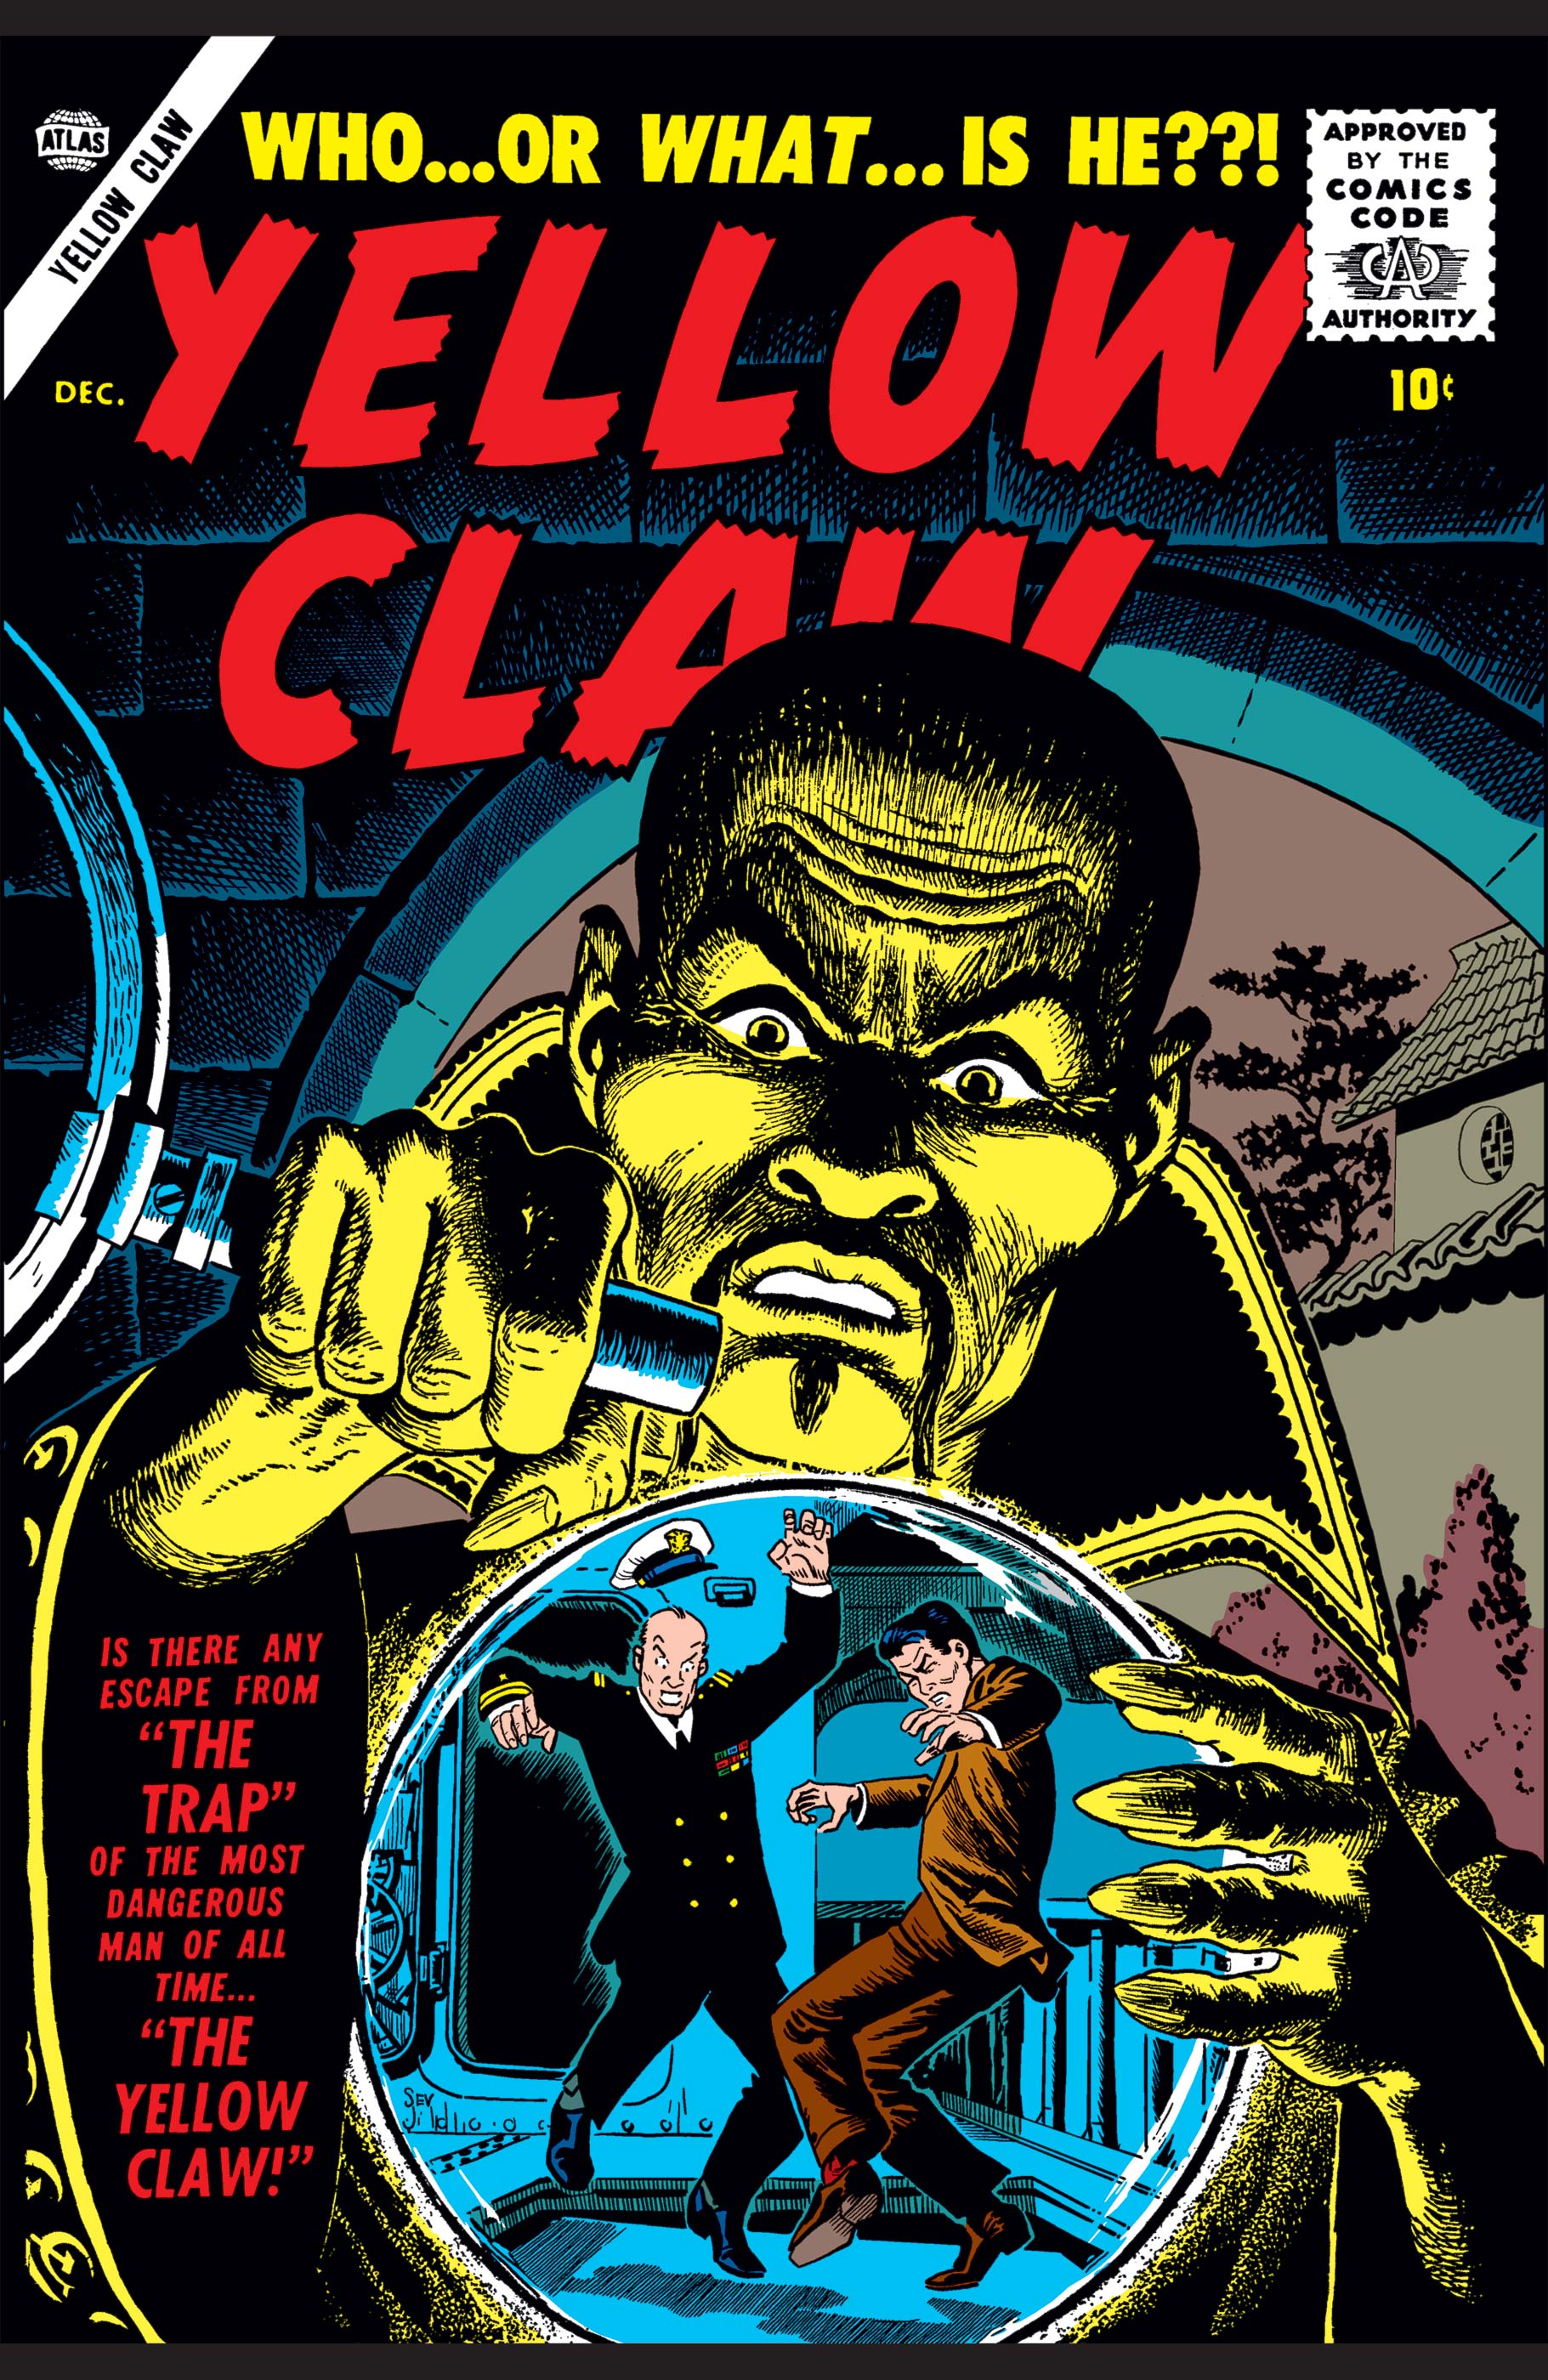 Yellow Claw (1956) #2